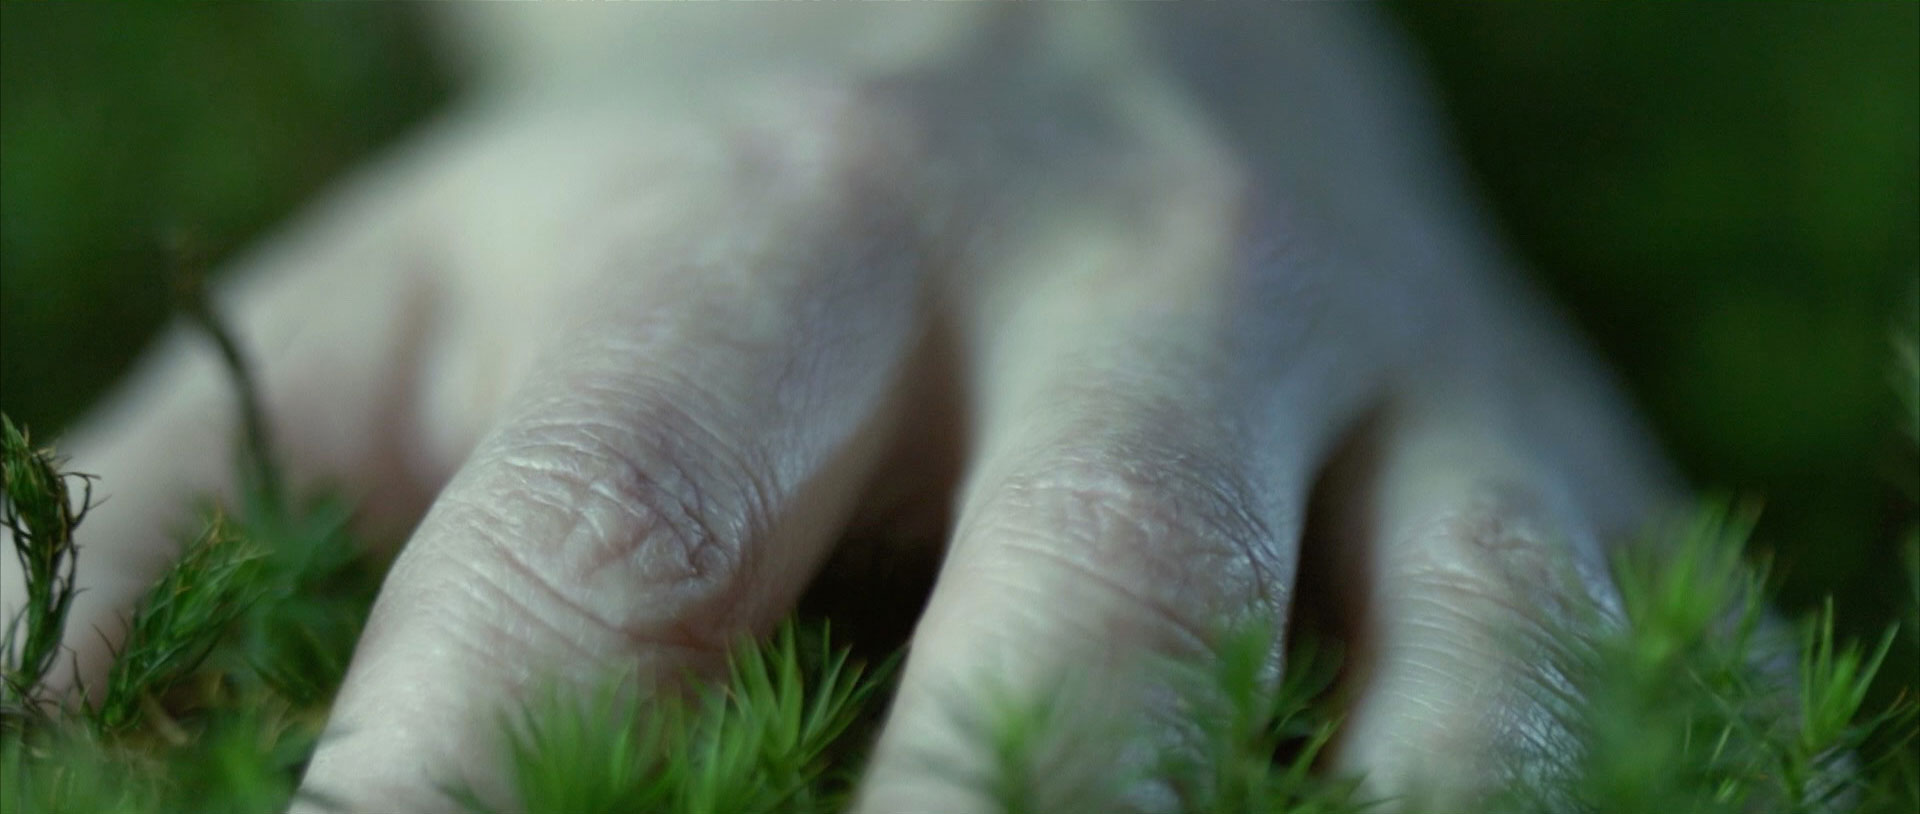 Hand in grass